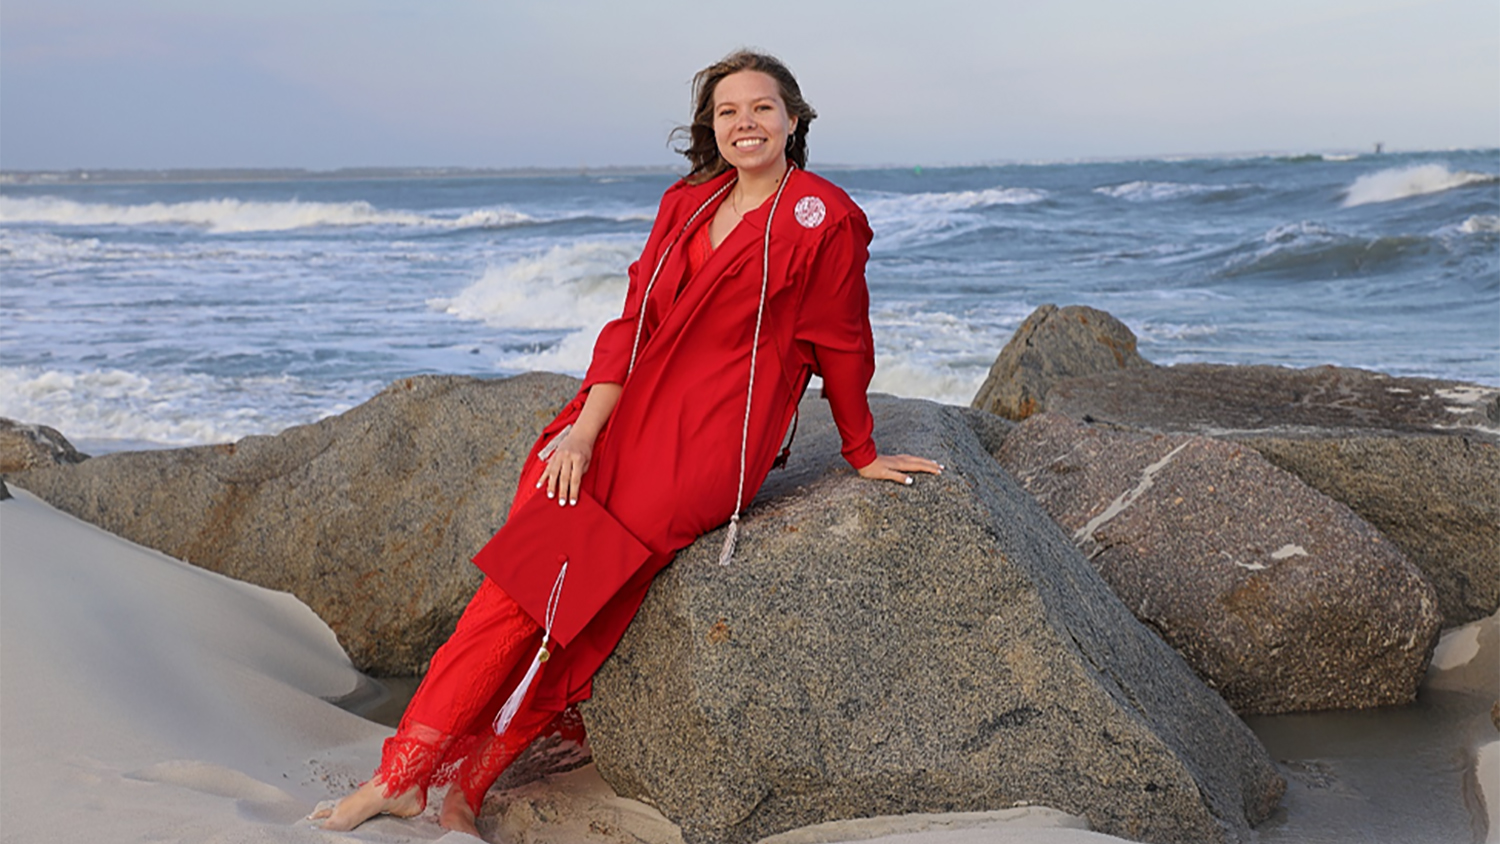 Savannah Tabor, dressed in NC State red graduation gown, leans against large boulders on Fort Macon Beach. The Atlantic Ocean and waves can be seen behind her.